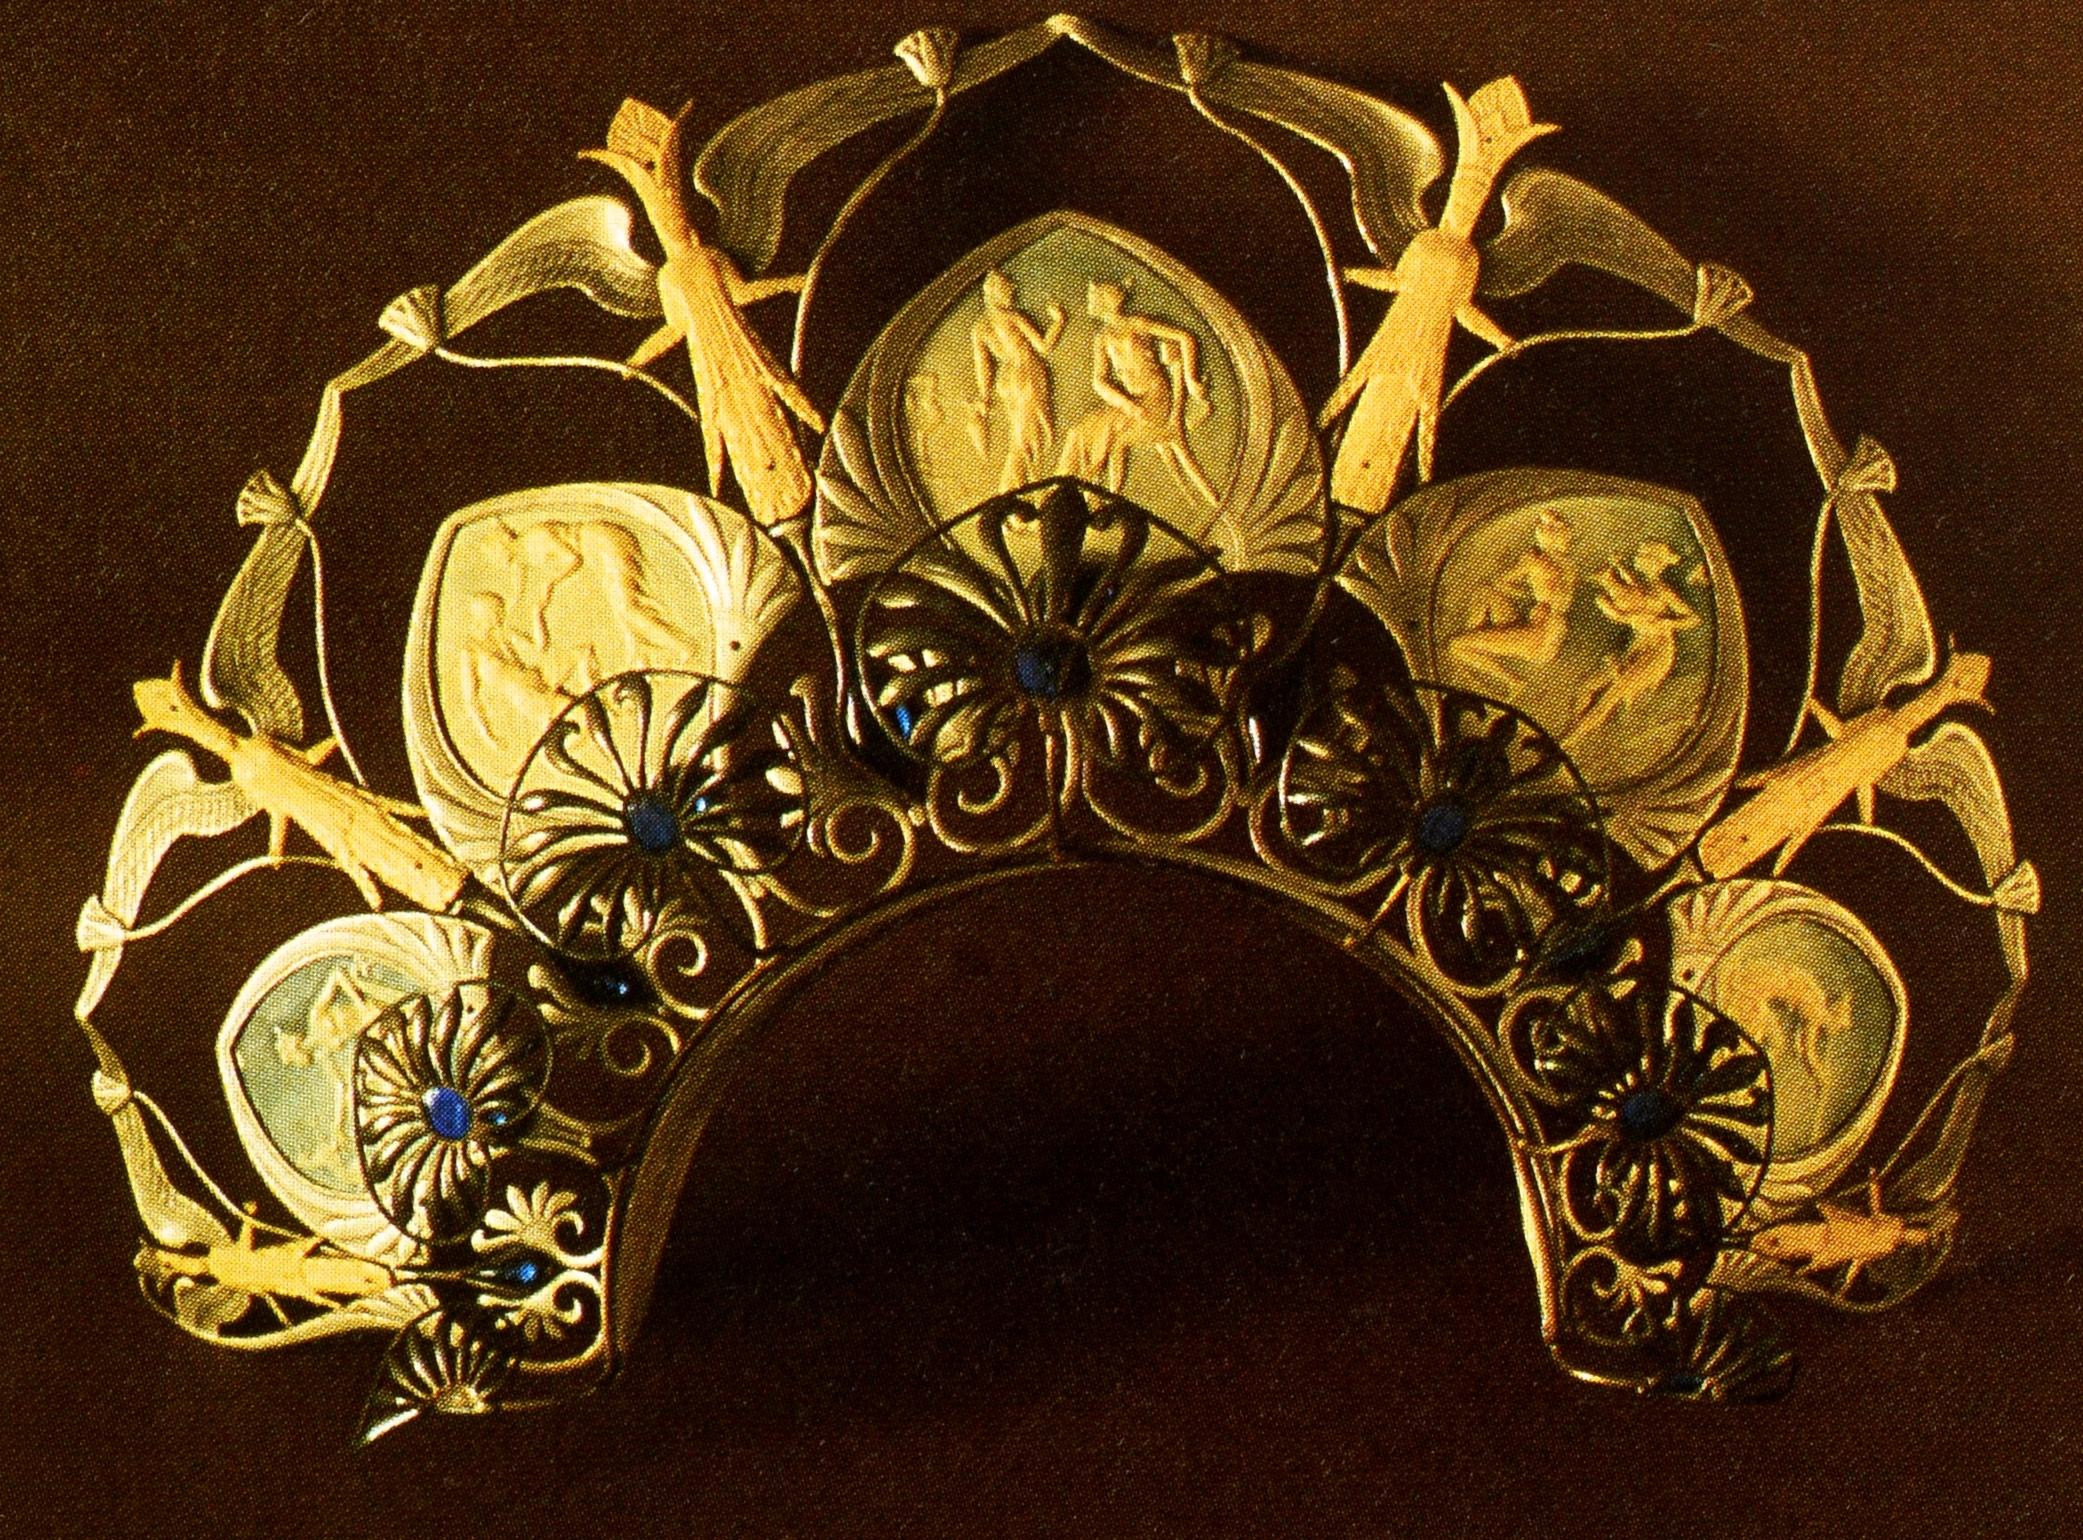 The Jewellery Of Rene Lalique Goldsmith's Company Exhibition, 28 May To 24 July 1